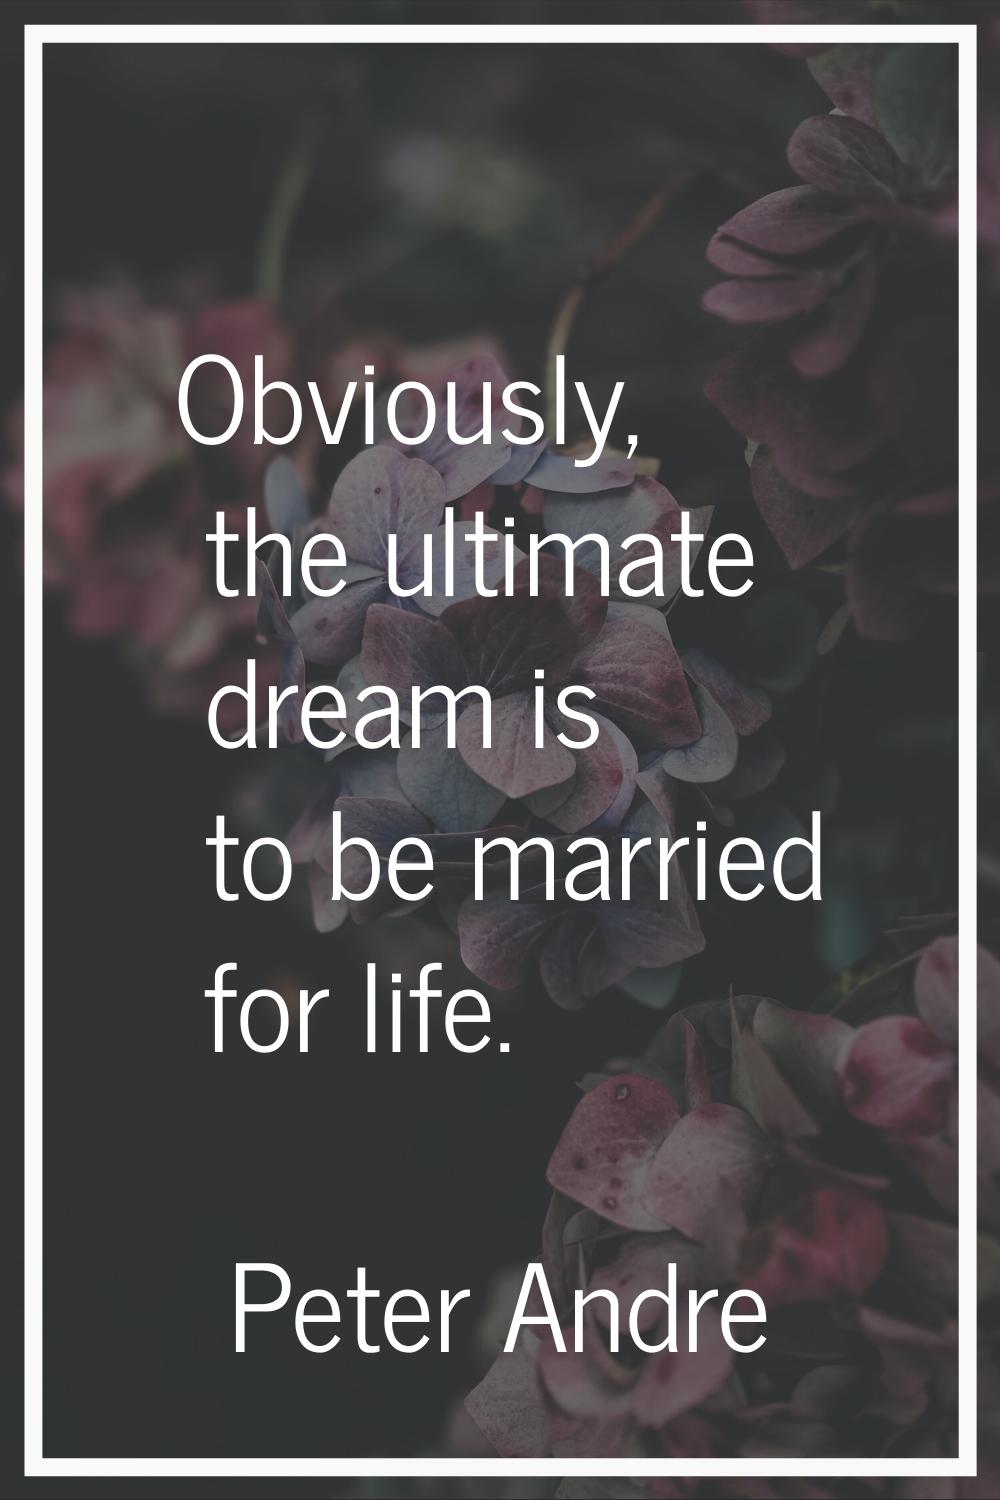 Obviously, the ultimate dream is to be married for life.